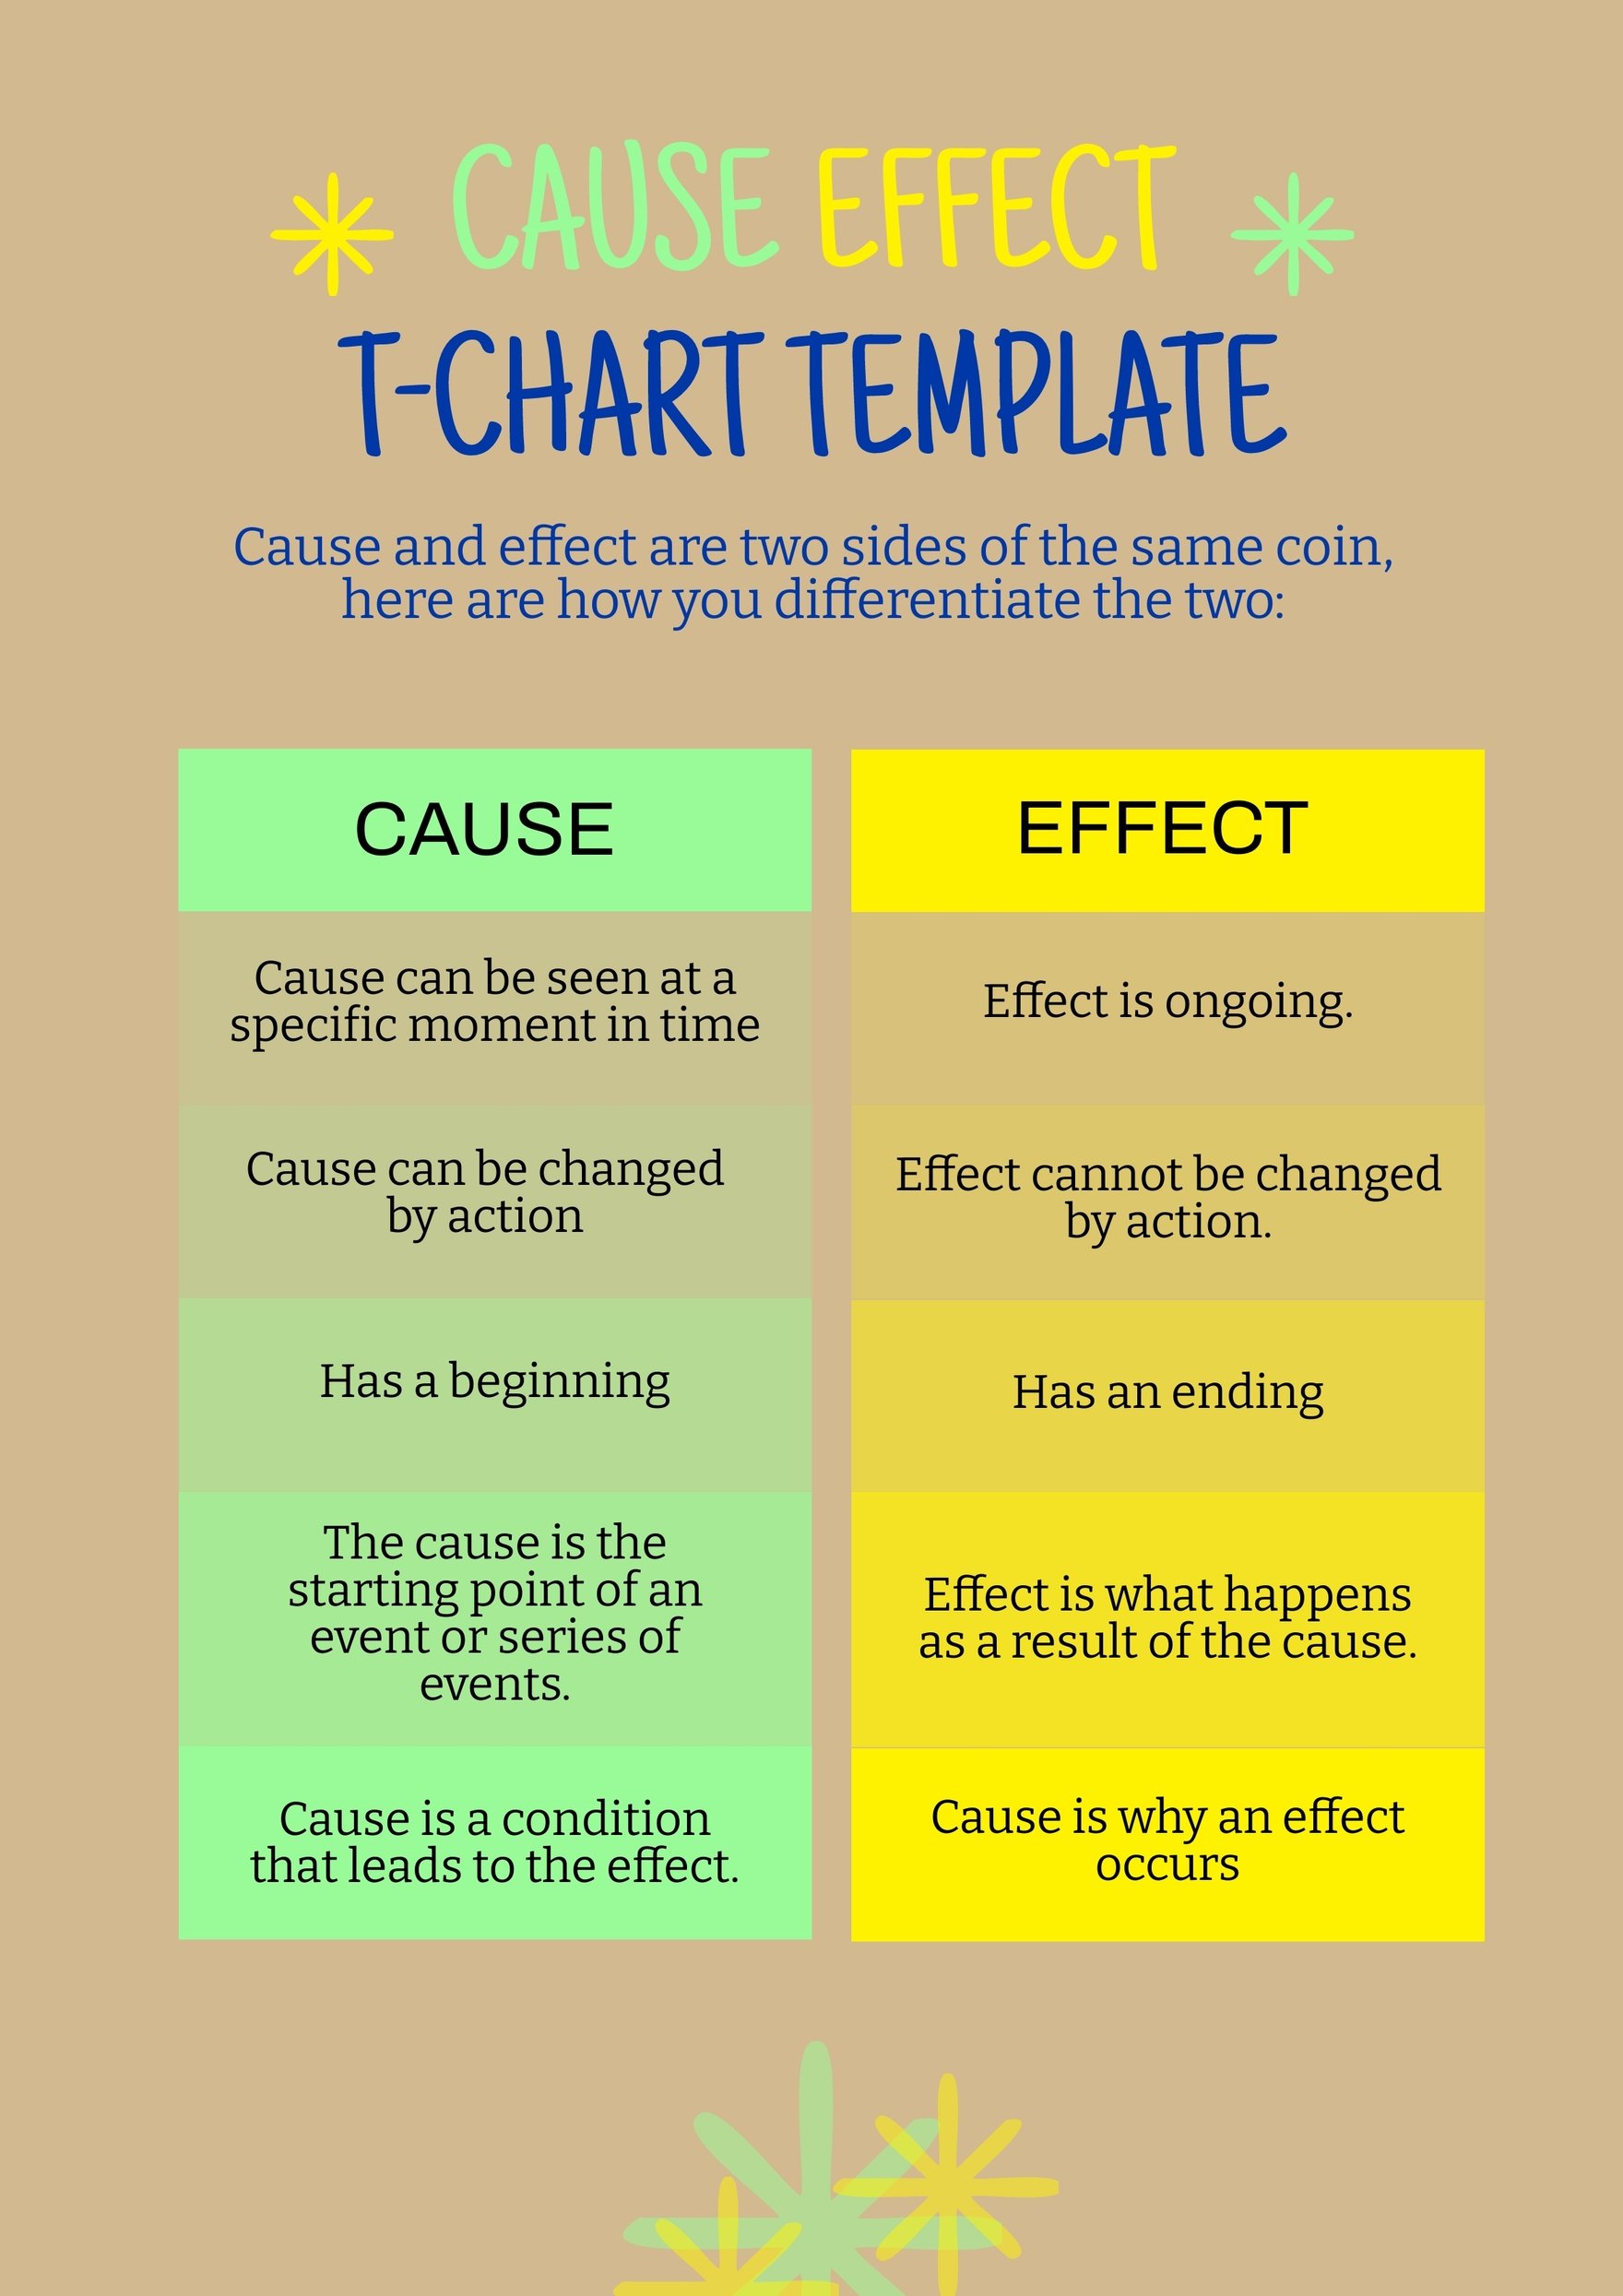 Free Cause Effect T Chart Template Download in PDF, Illustrator